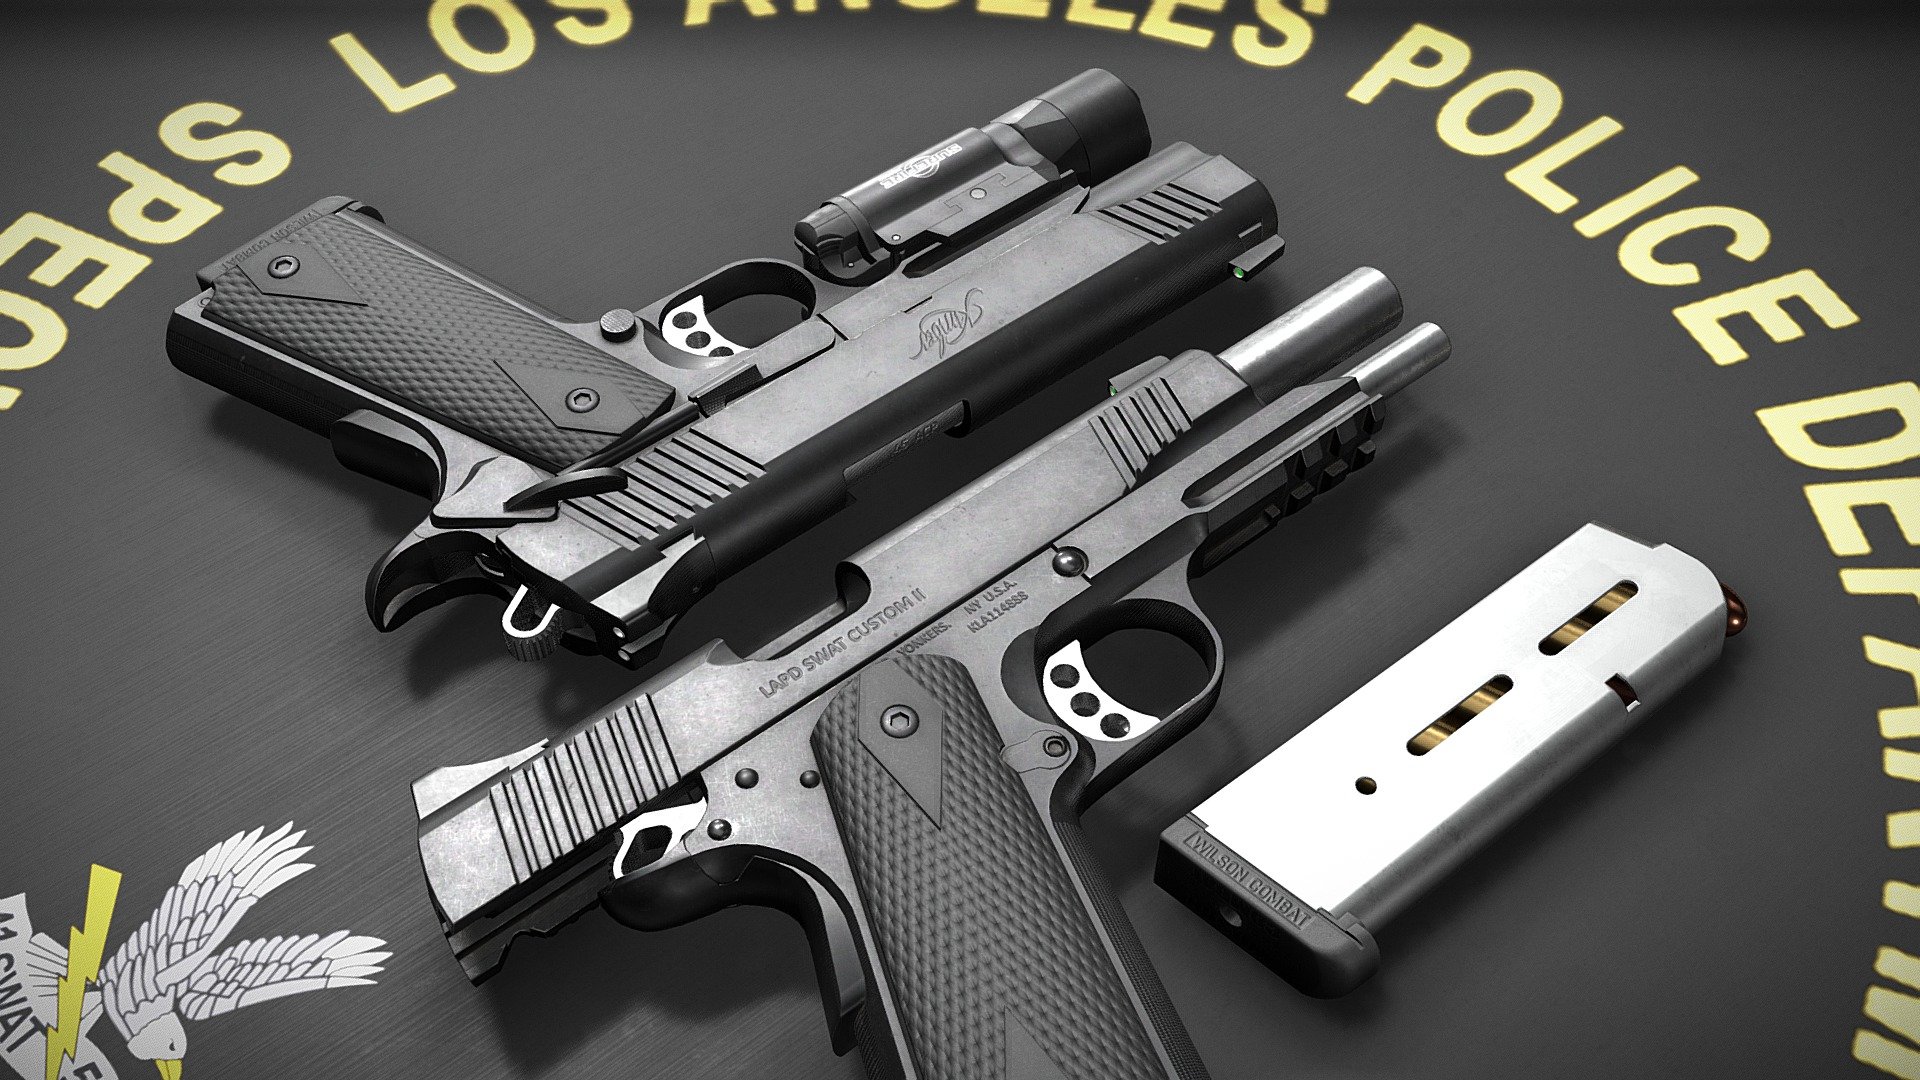 Kimber Custom Tactical Law Enforcement Rail II (TLE/RL II). This is the same handgun that's used by the Los Angeles Police Department's Special Weapons and Tactics team, which entered service from 2002 to present. Since around the 2010s, LAPD SWAT has upgraded their Kimbers to have a picatinny rail frame, which allowed the mounting of flashlights. The SureFire x300 series remain their main flashlight attachment of choice. 

Interestingly, LAPD SWAT Kimbers feature custom engraved markings on the slide and has a special serial number &ldquo;KLA114XXX